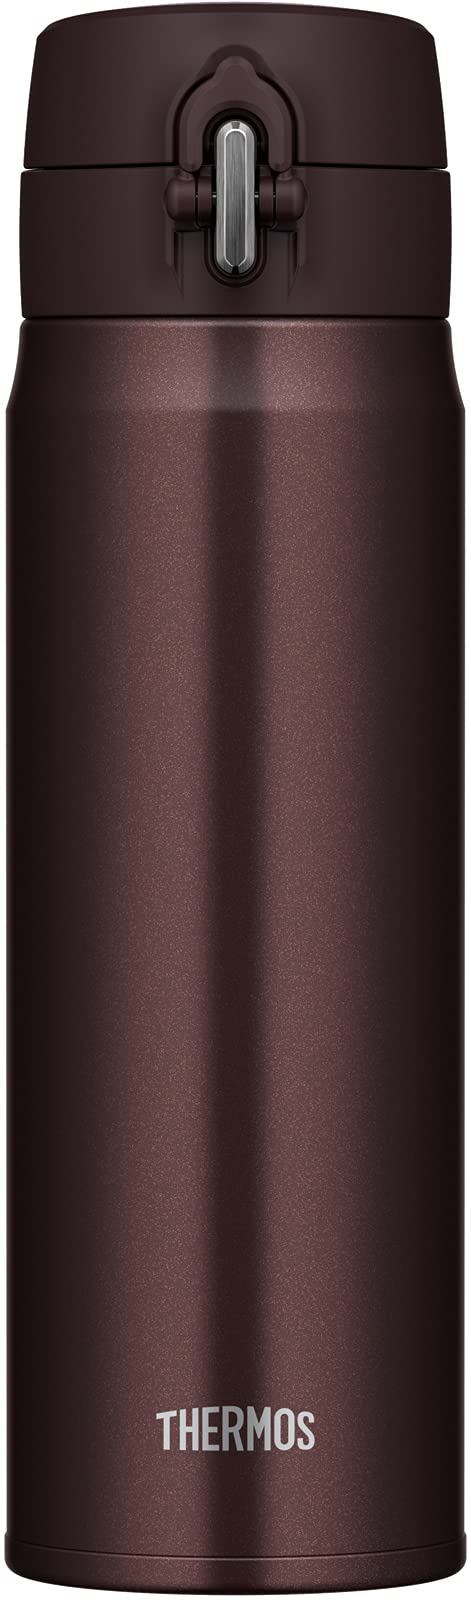 Thermos Water Bottle Vacuum Insulated Mobile Mug 500ml Brown JOH-500 BW NEW_2